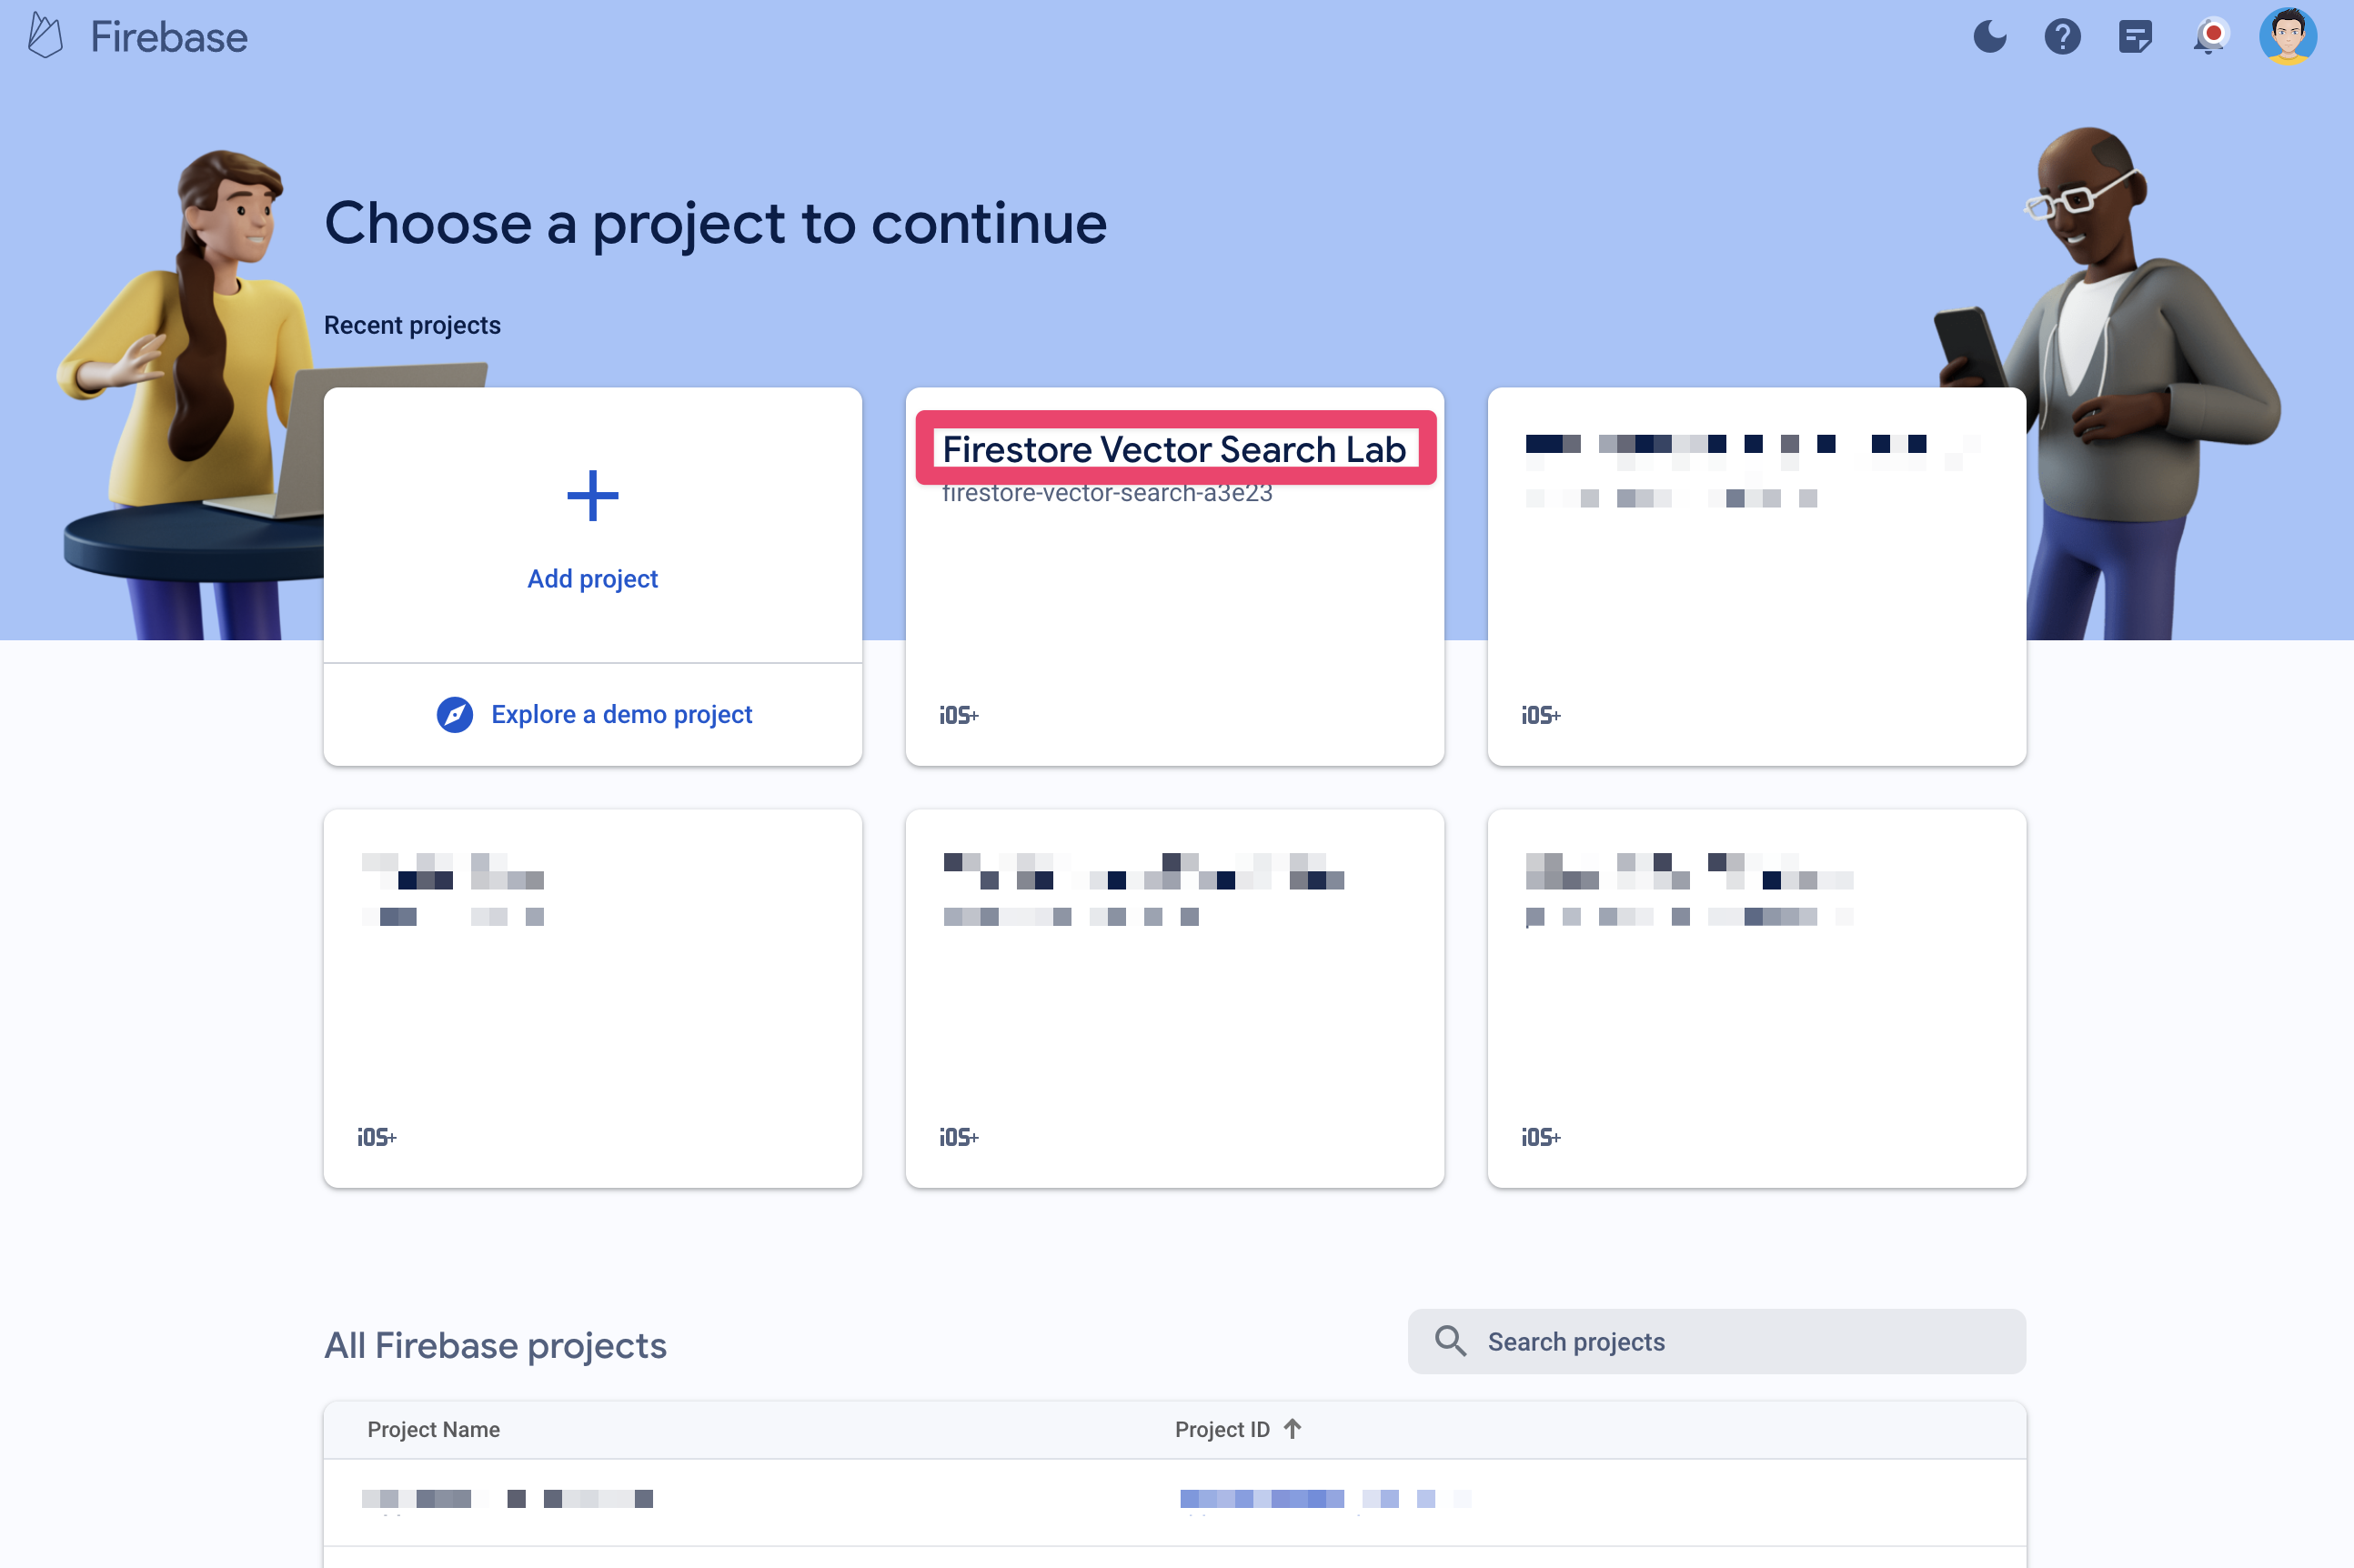 The Firebase project selector screen